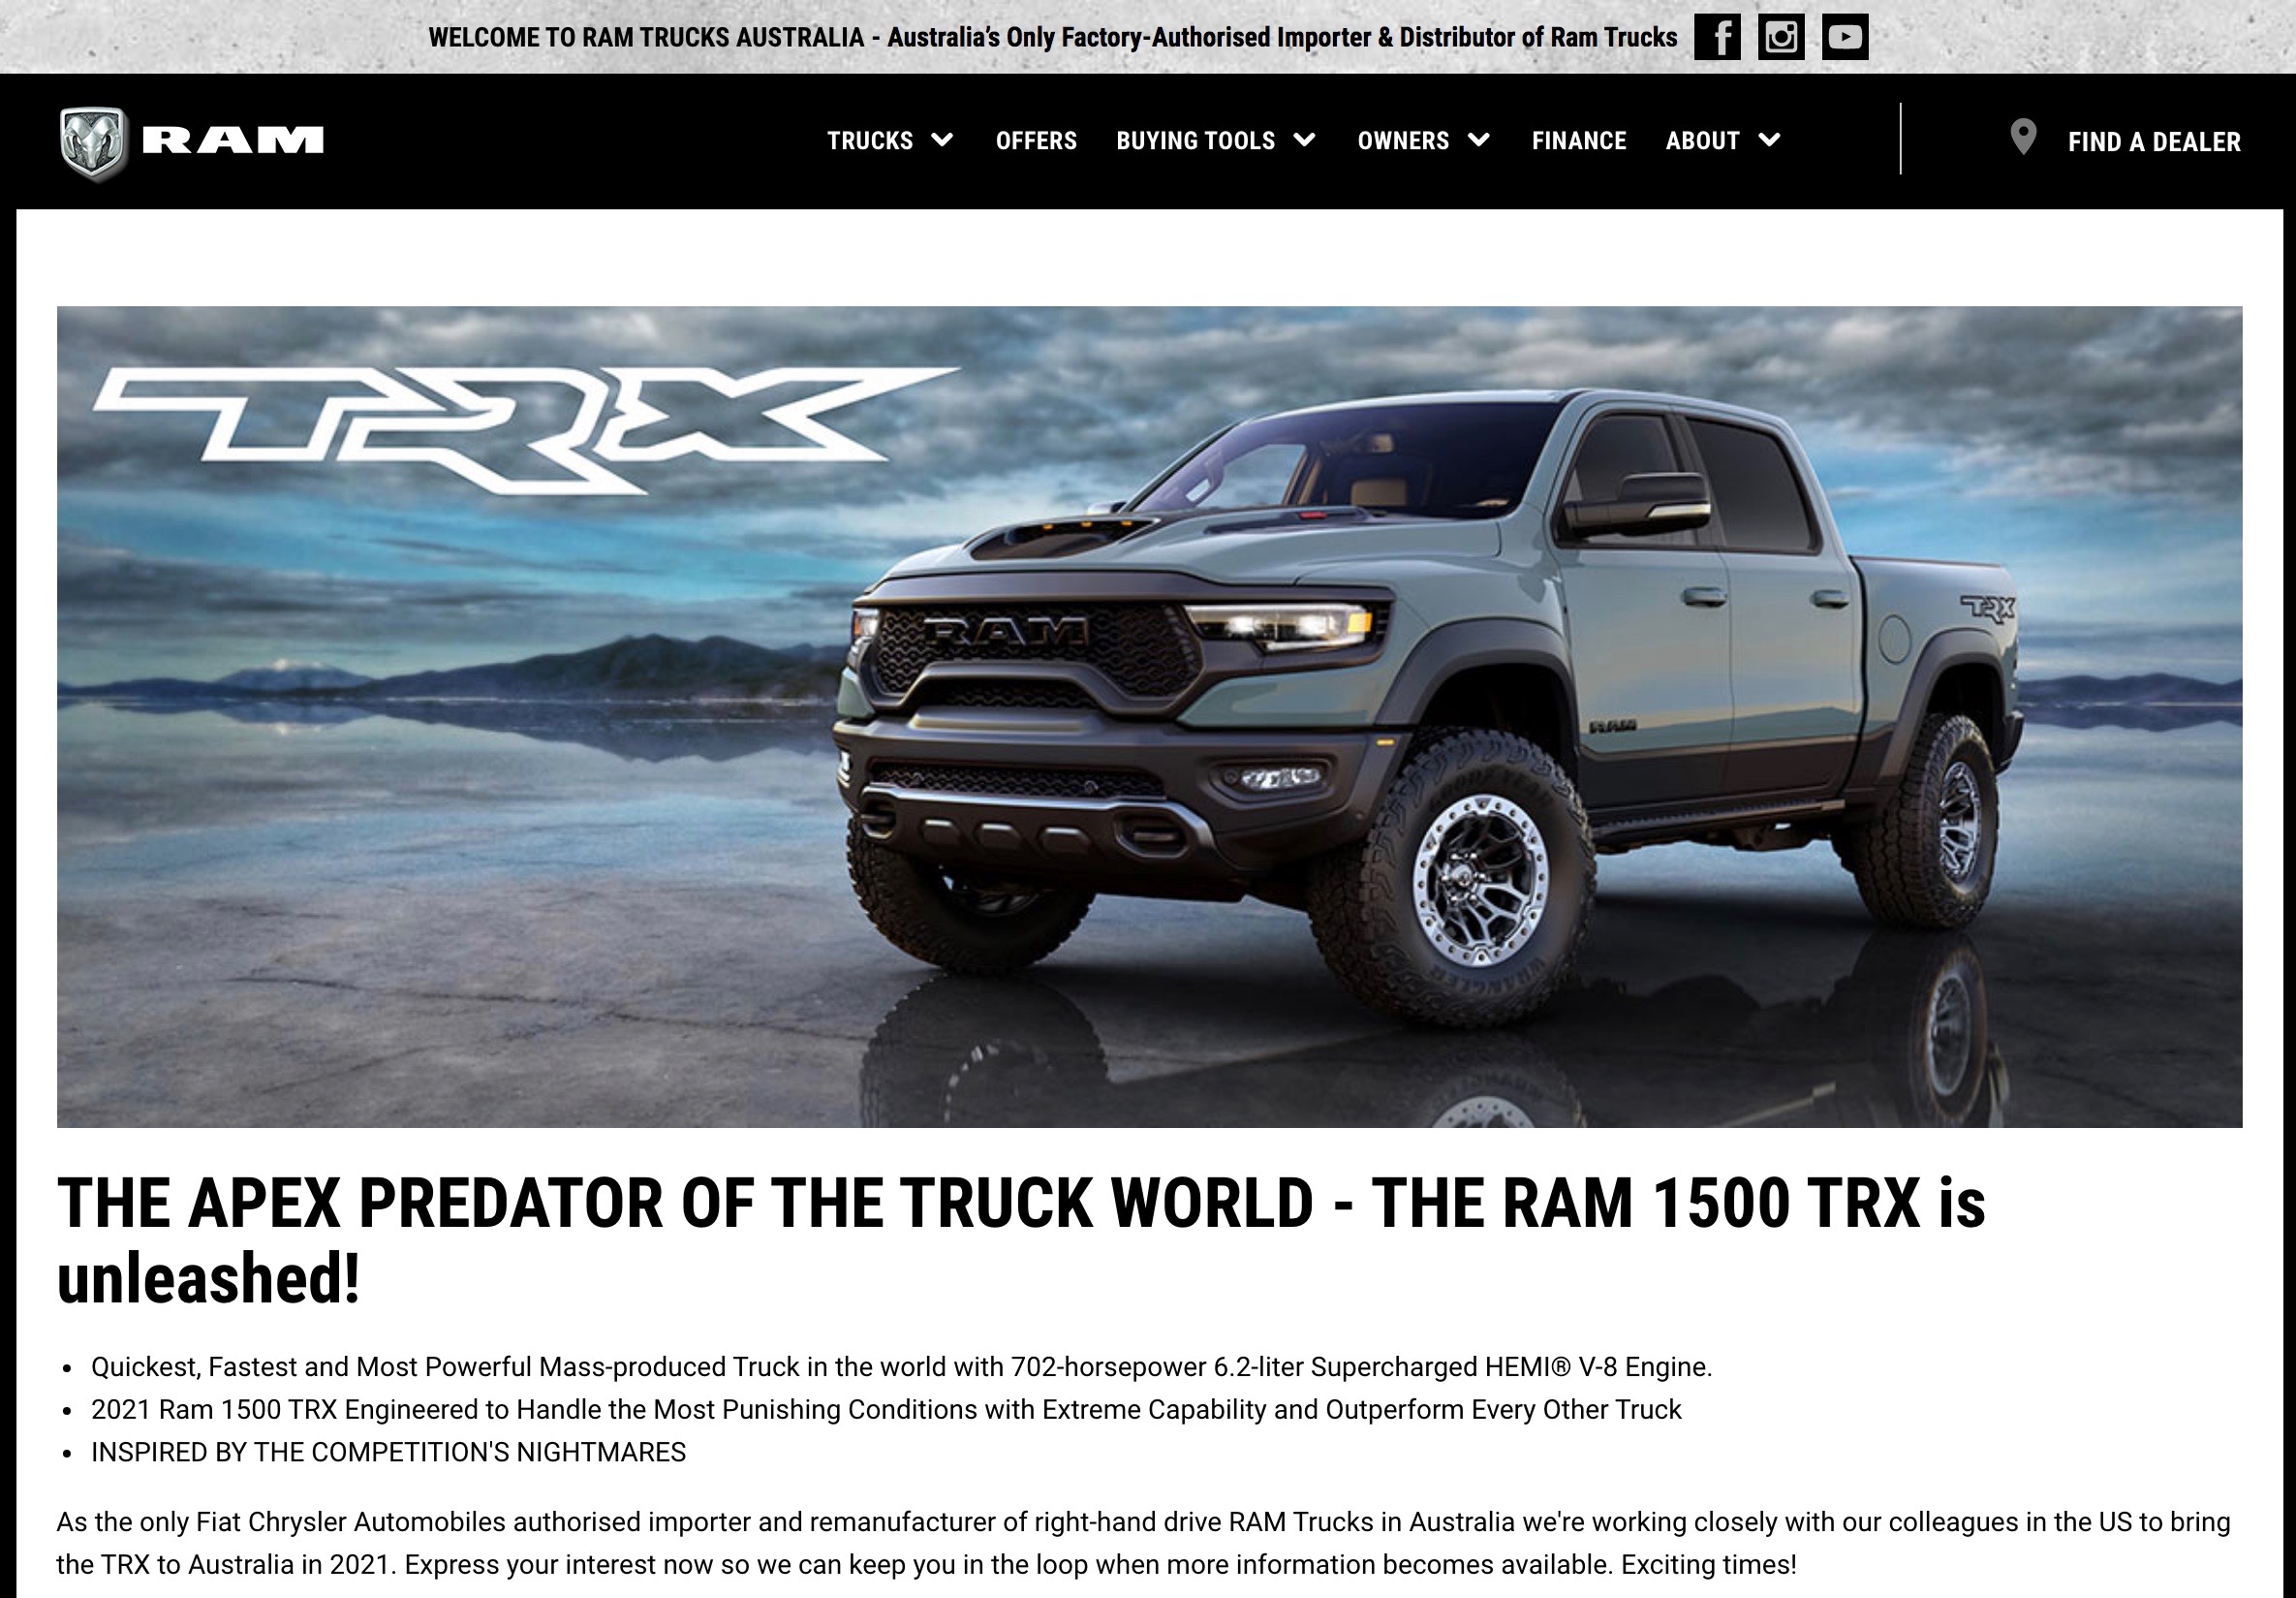 2021 RAM 1500 TRX ‘Hellcat’ confirmed for Australia, to arrive later this year